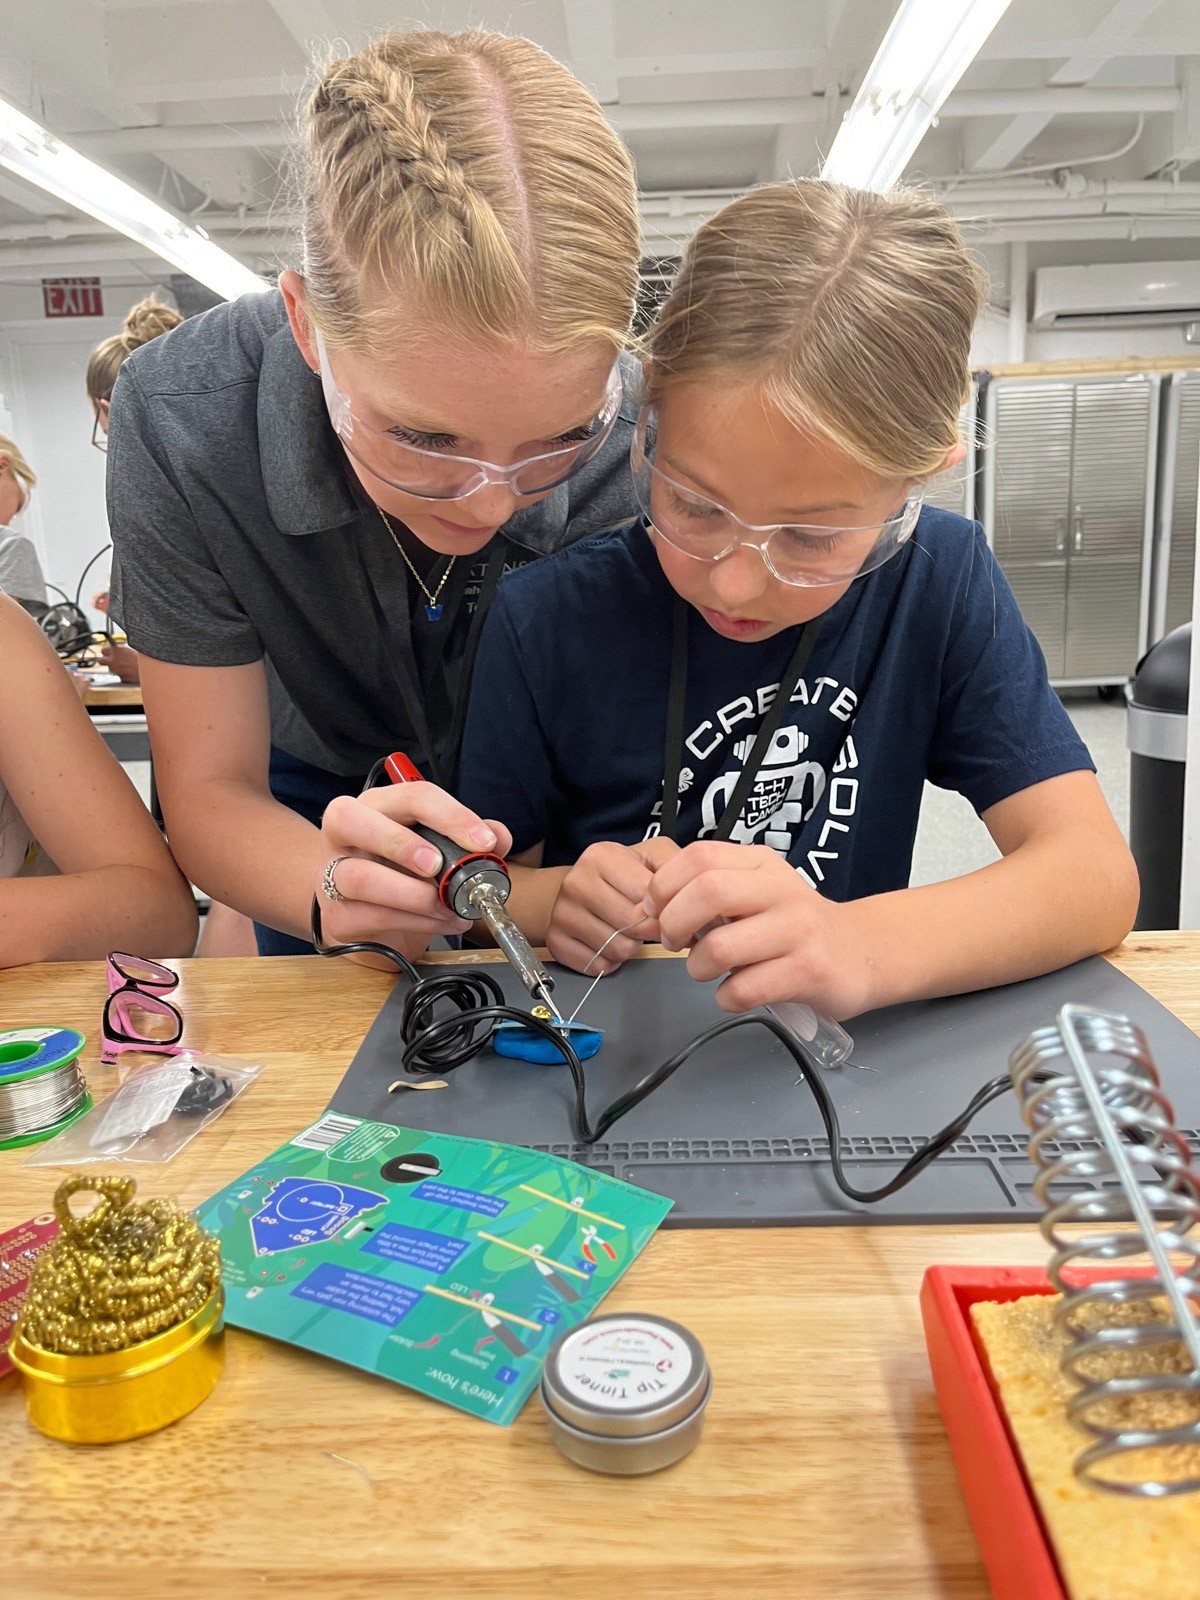 Two girls solder a project in a lab classroom.